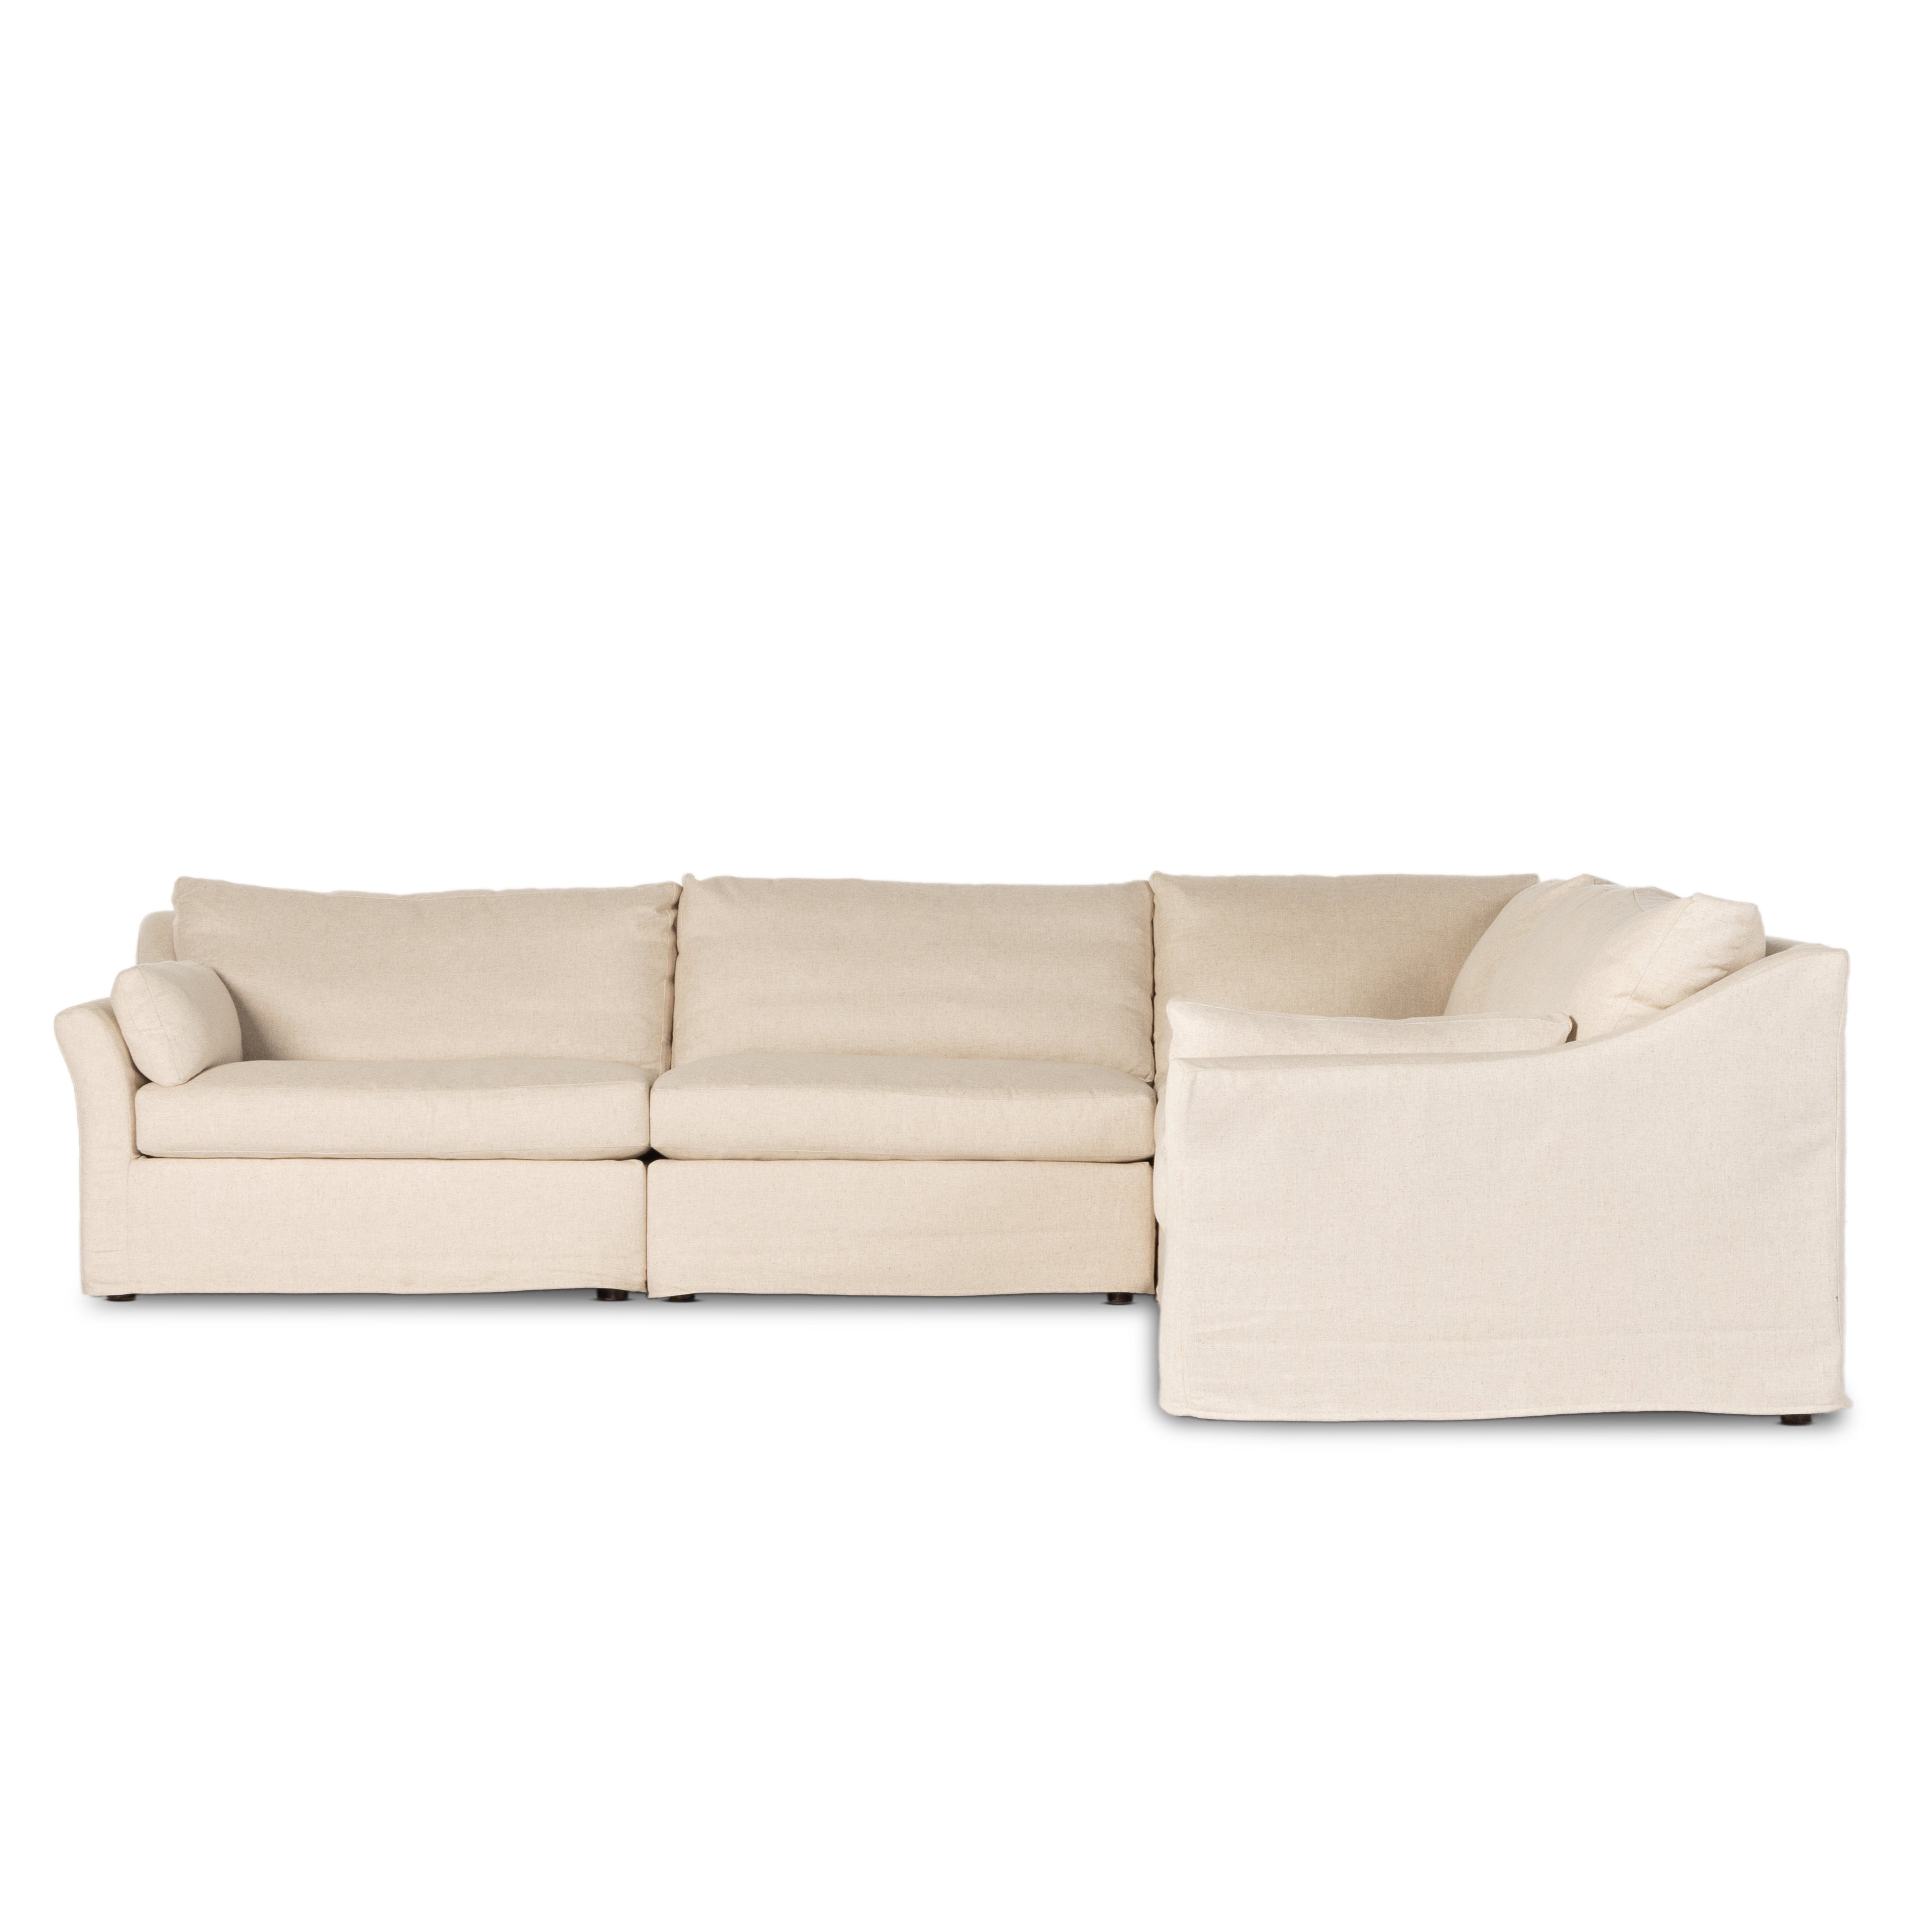 Delray 5pc Slipcover Sect-Creme - StyleMeGHD - 